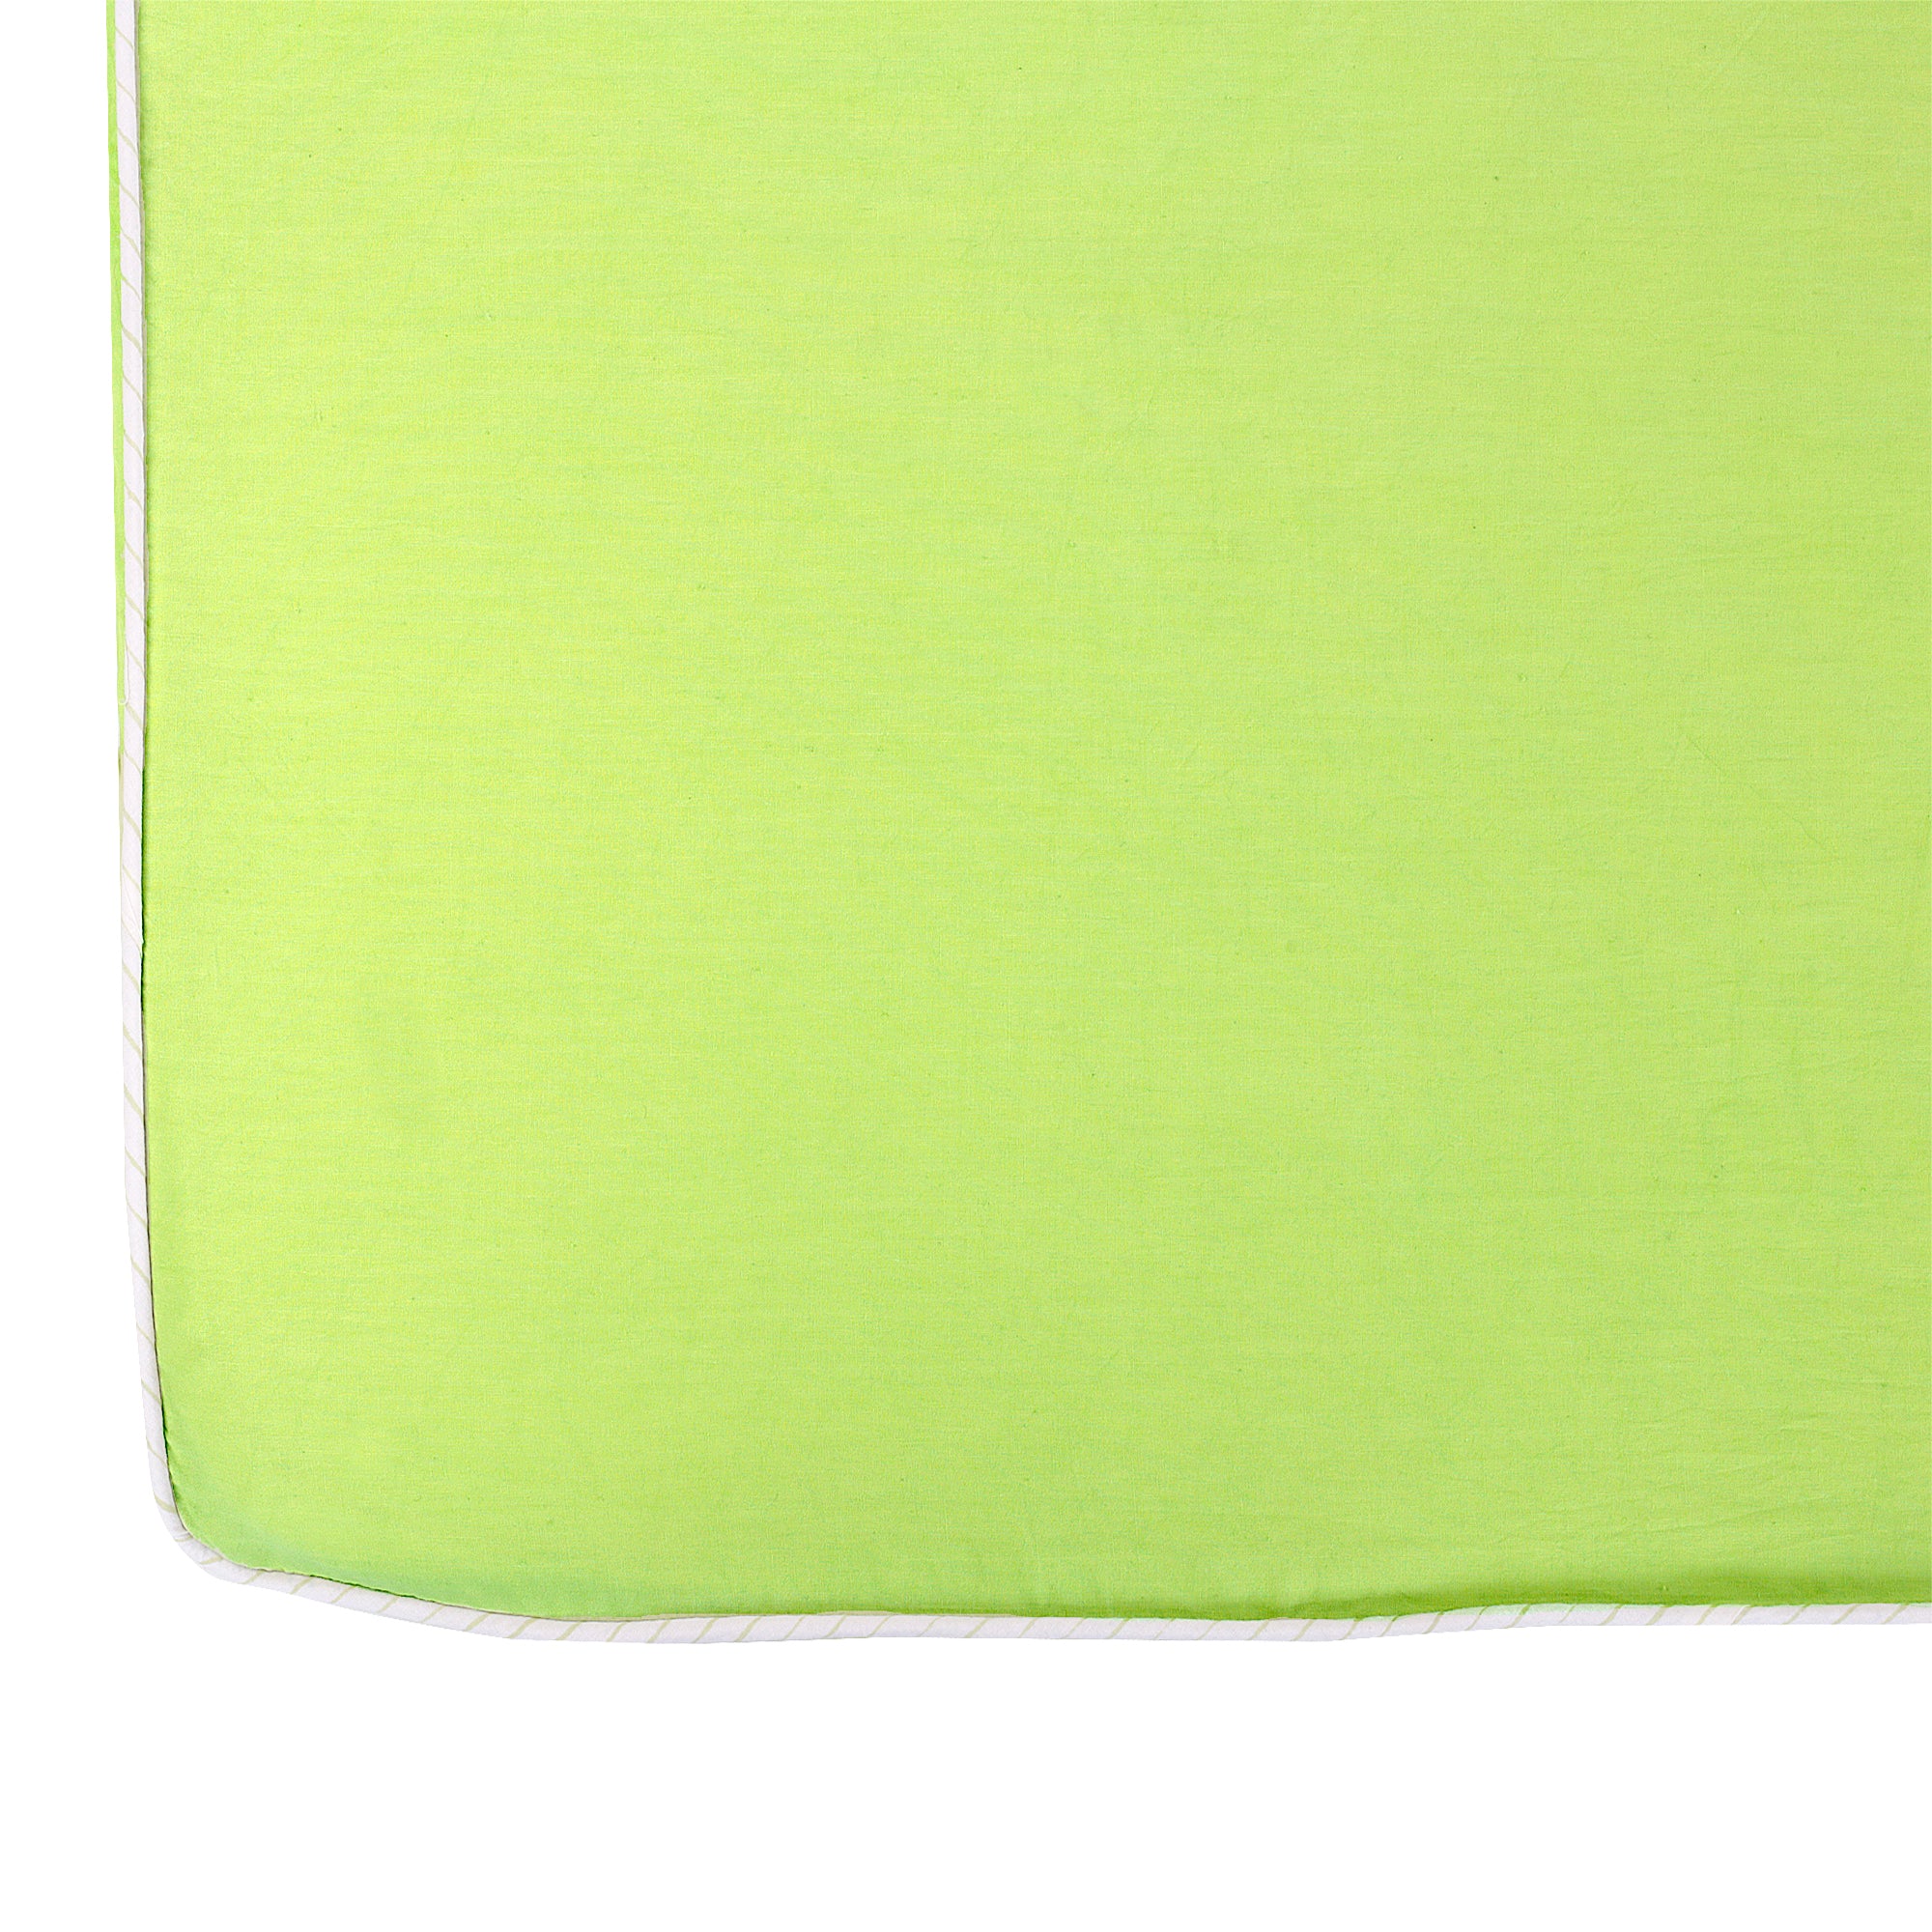 SHADOW LIME FITTED CRIB SHEET